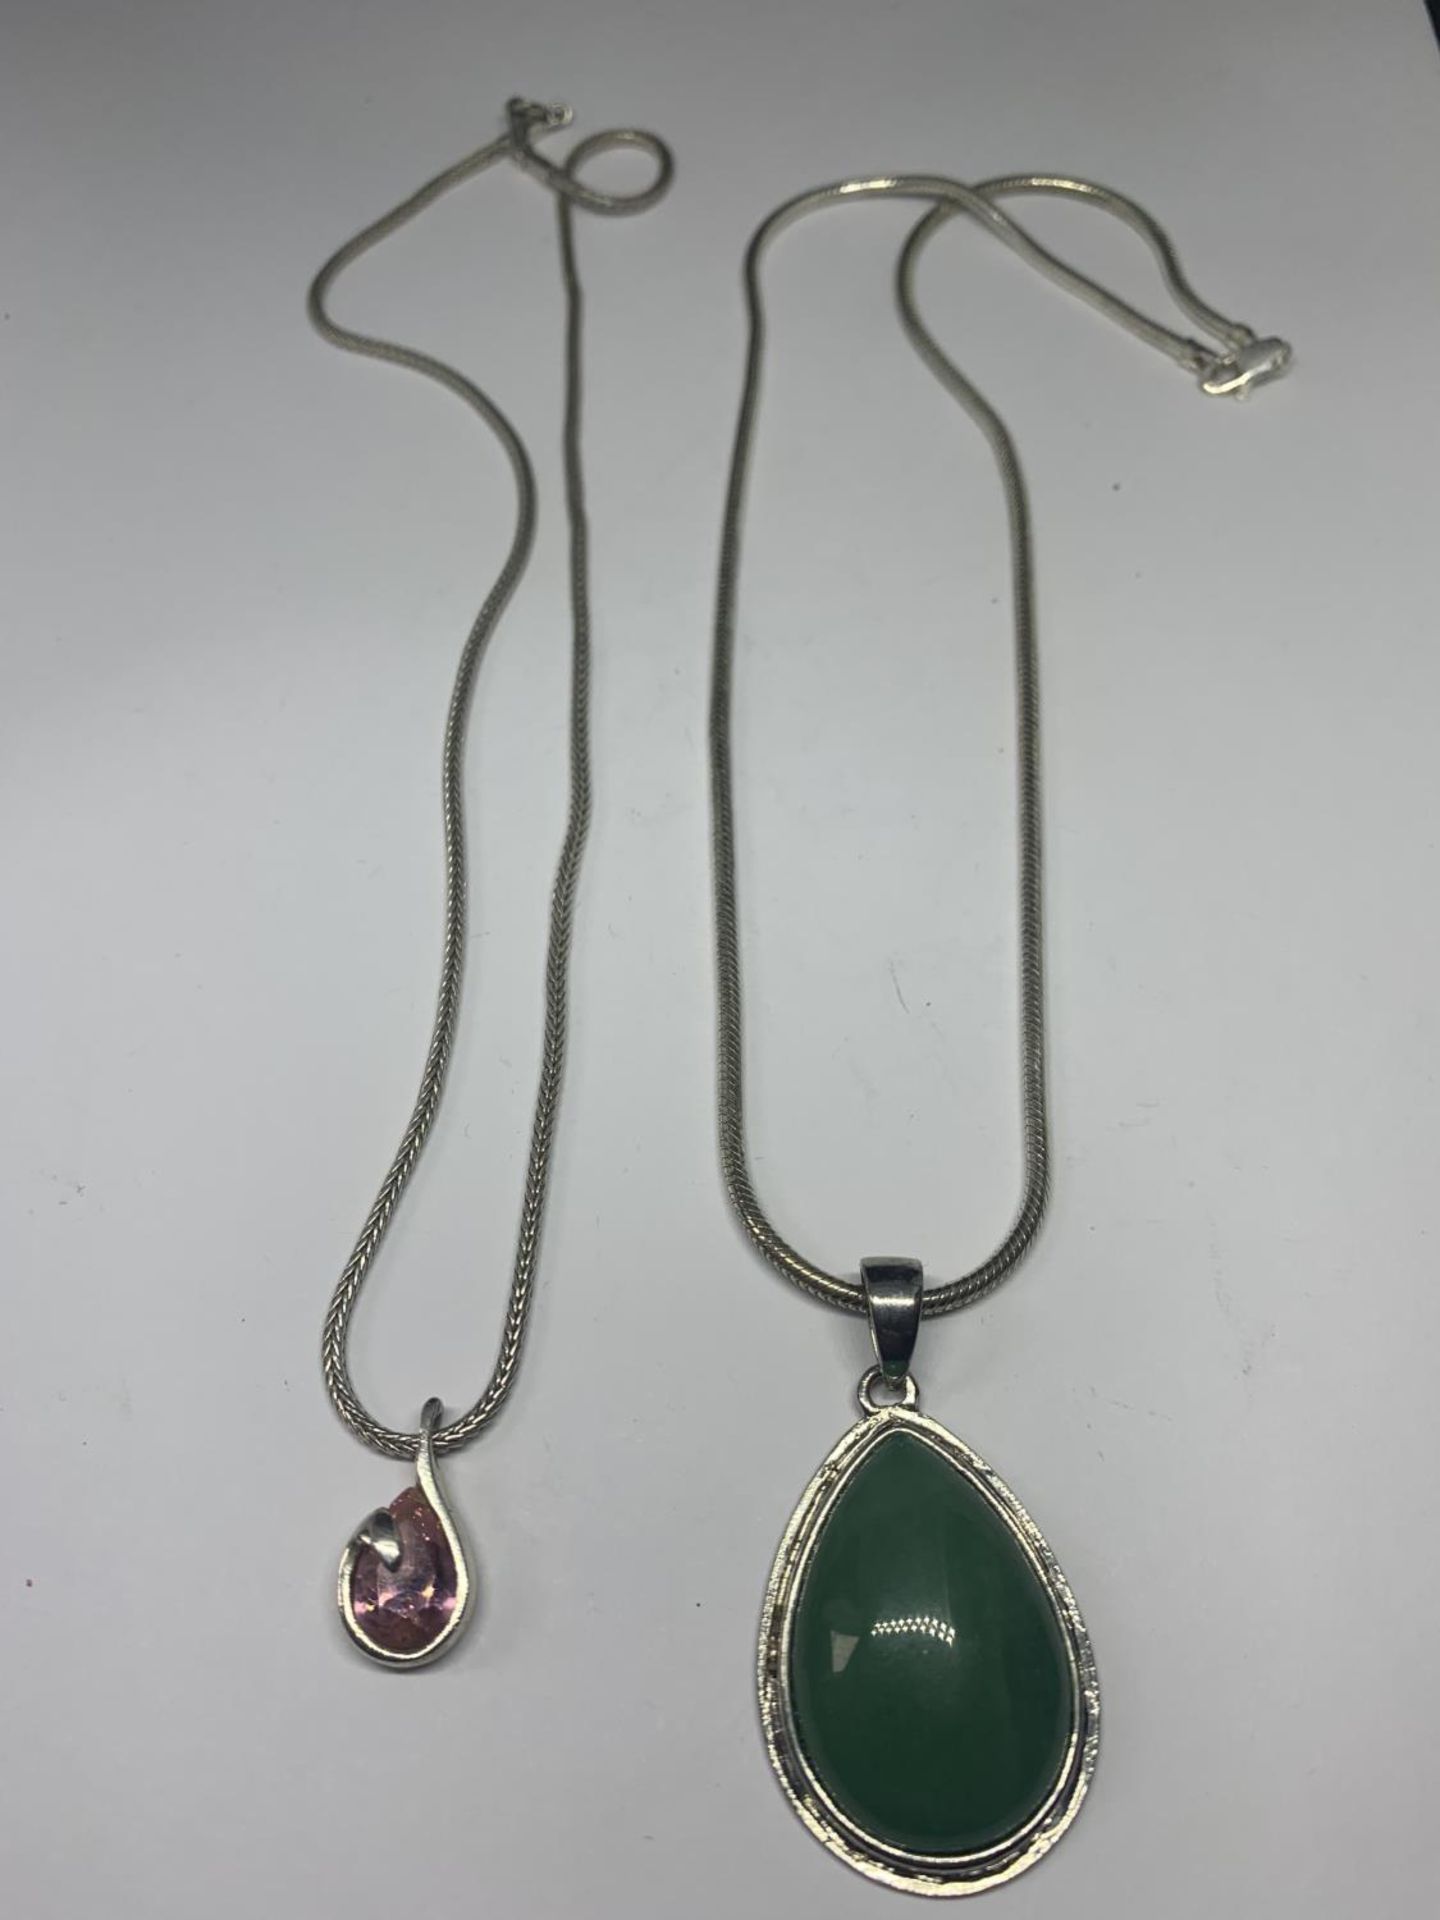 TWO SILVER NECKLACES WITH PENDANTS TO INCLUDE A LARGE GREEN TEARDROP AND A PINK EXAMPLE